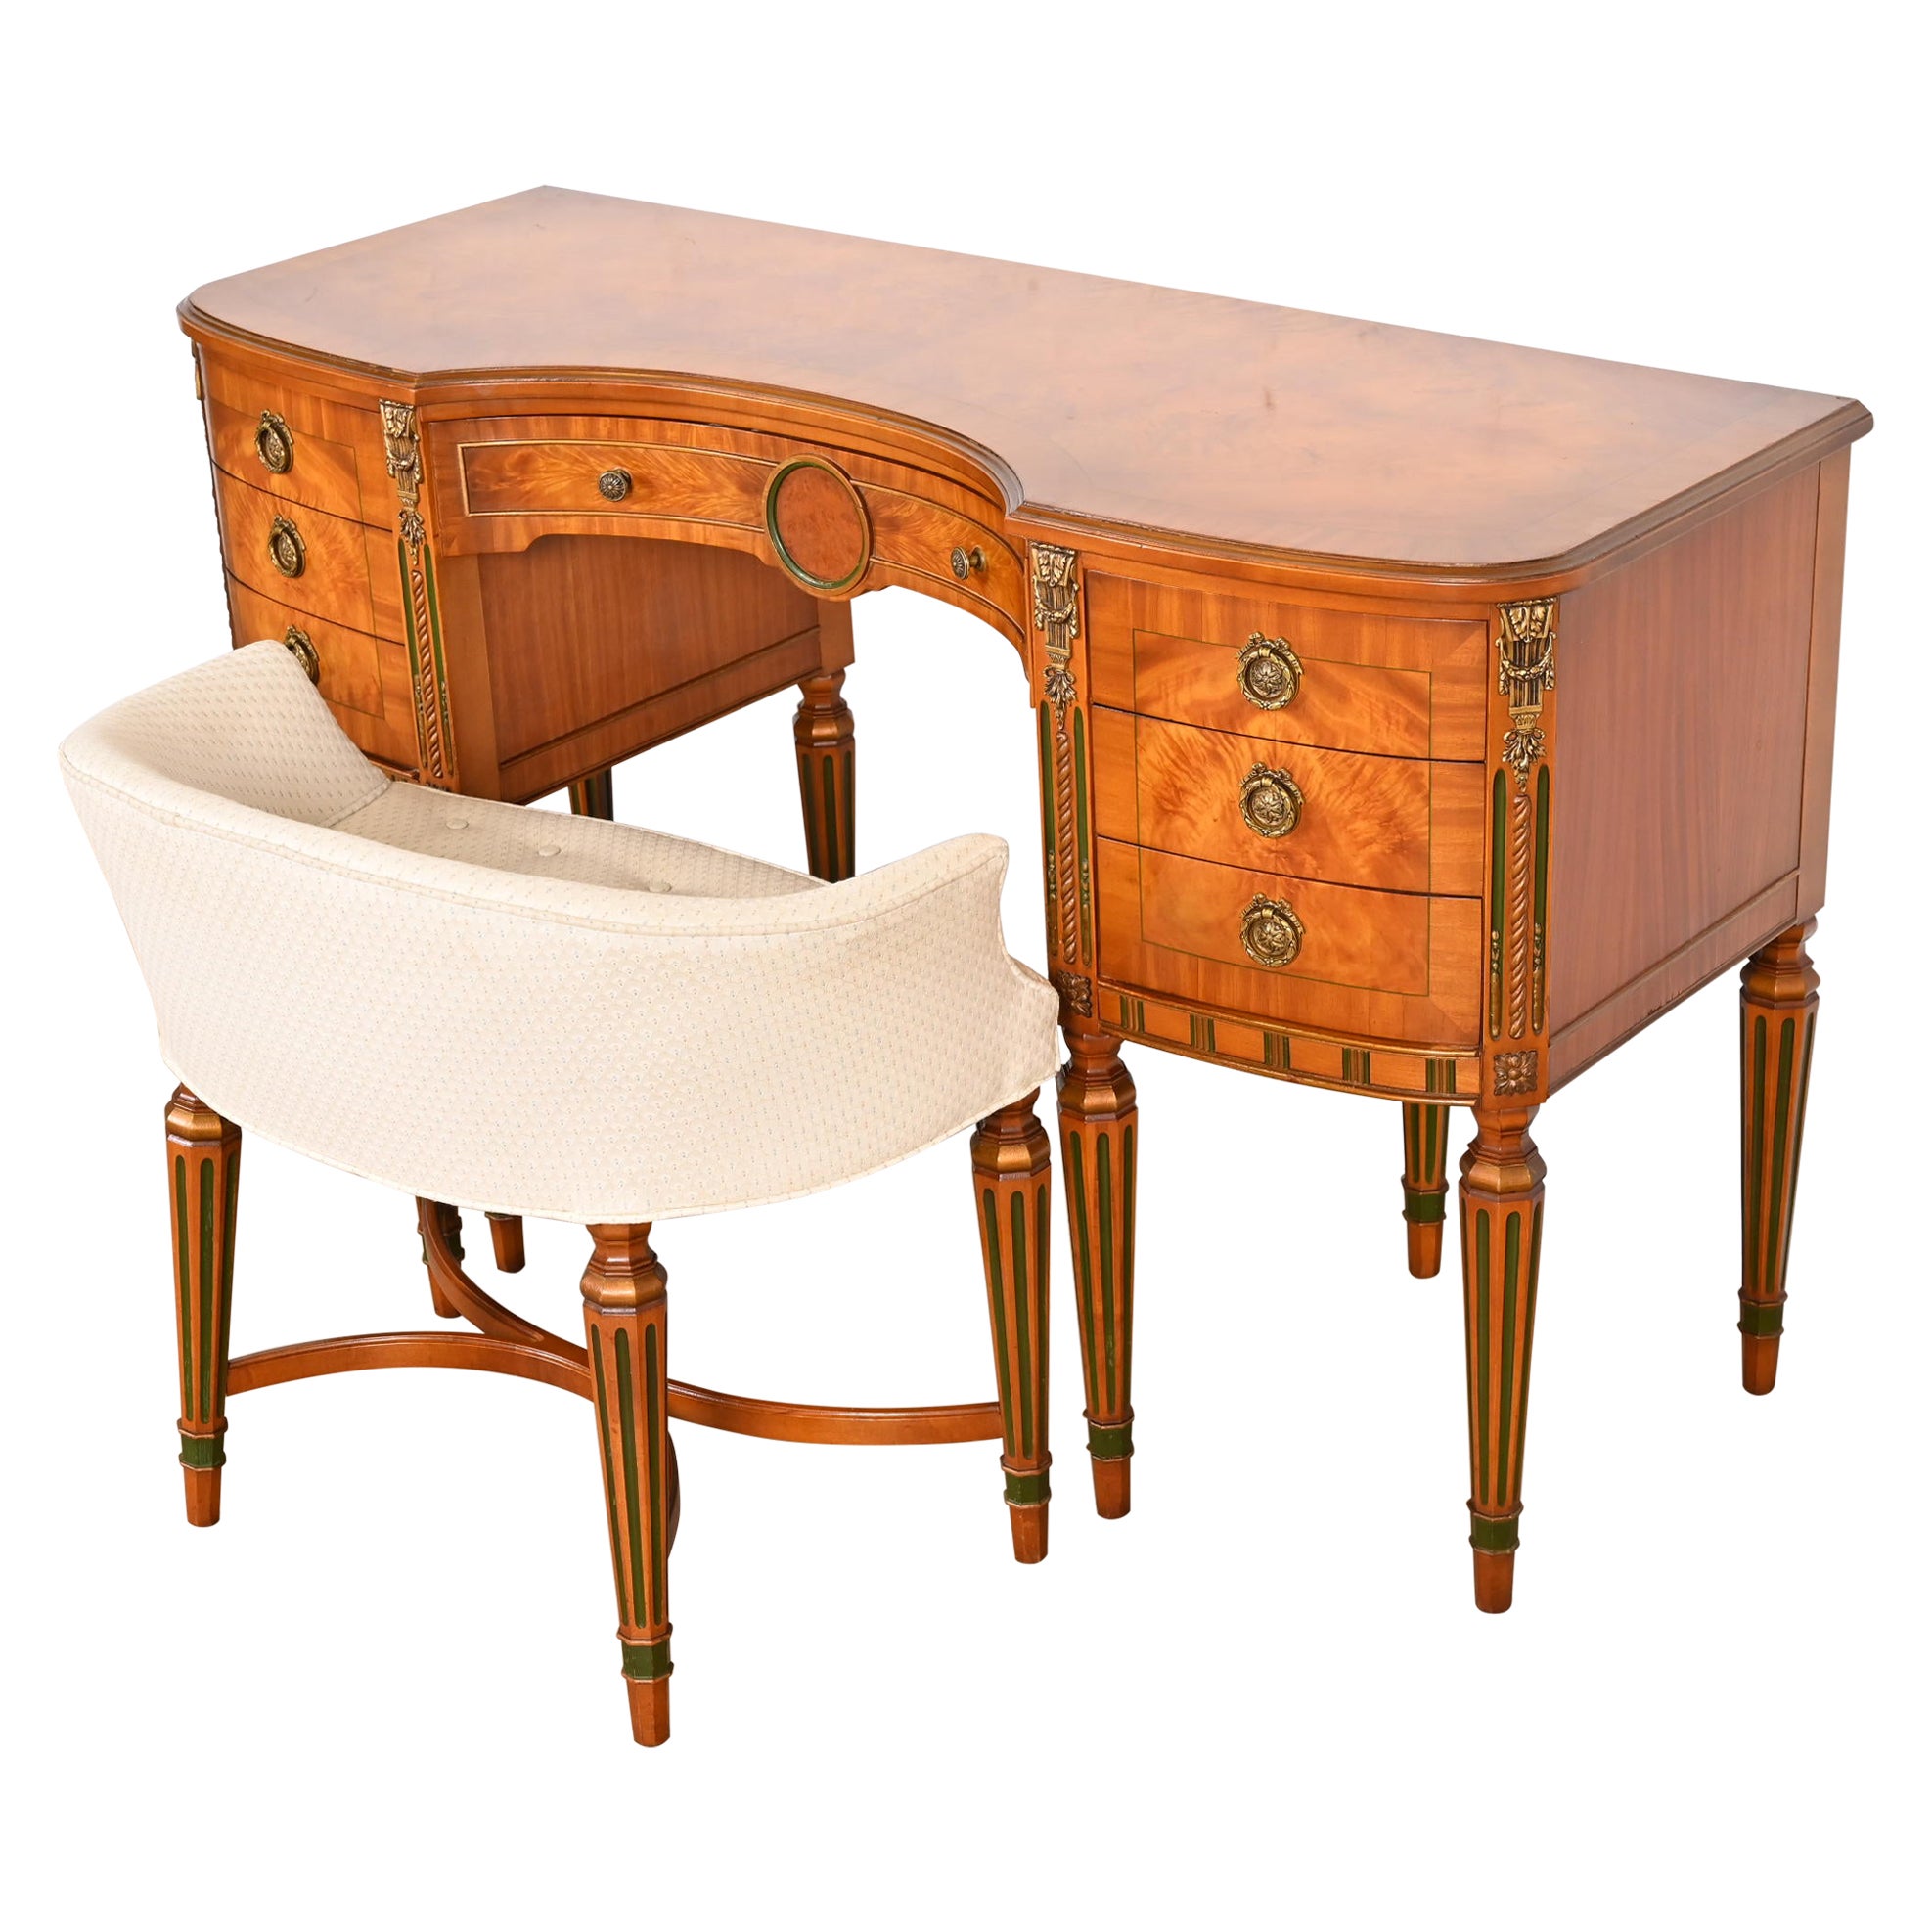 French Regency Louis XVI Satinwood Vanity With Bench Attributed to Romweber